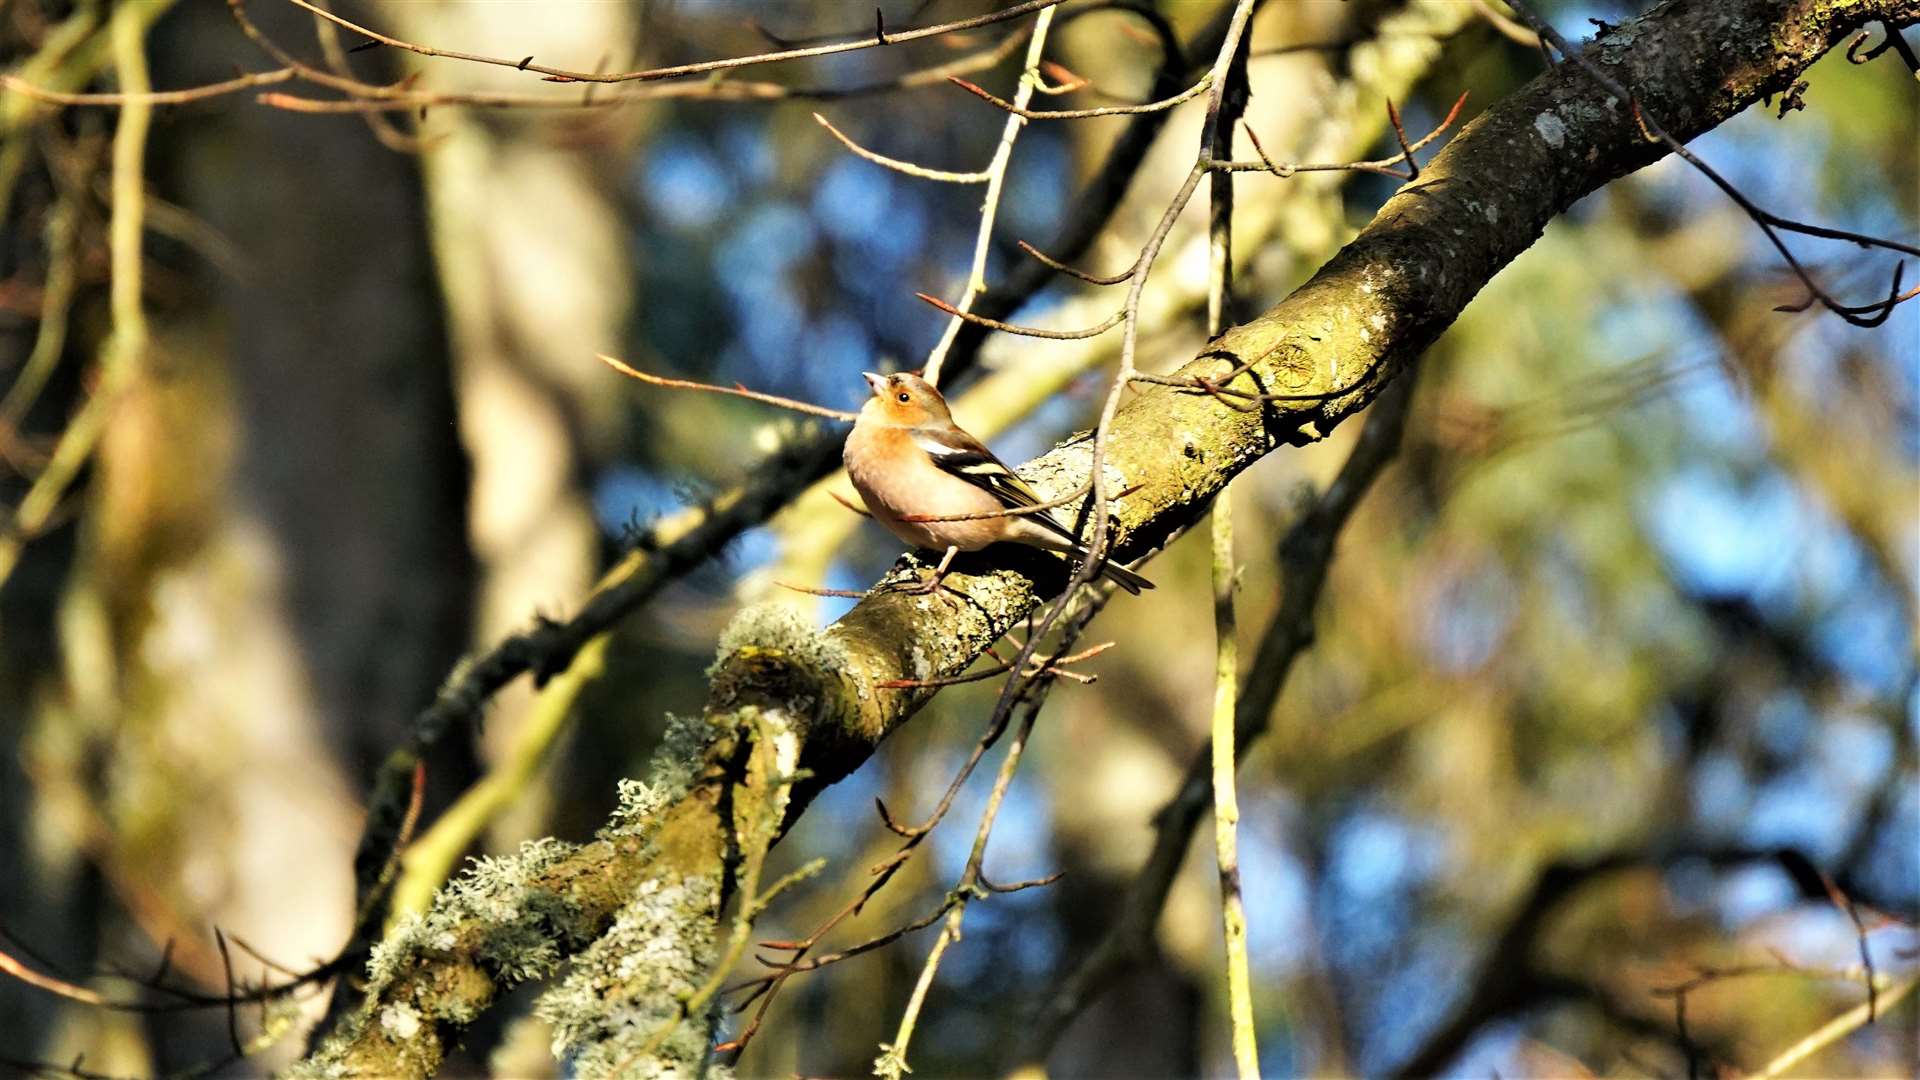 The gentle weather conditions provided a chance to spot birdlife such as this chaffinch but there was no show by the woodpecker which had recently been seen in the woods. Picture: DGS